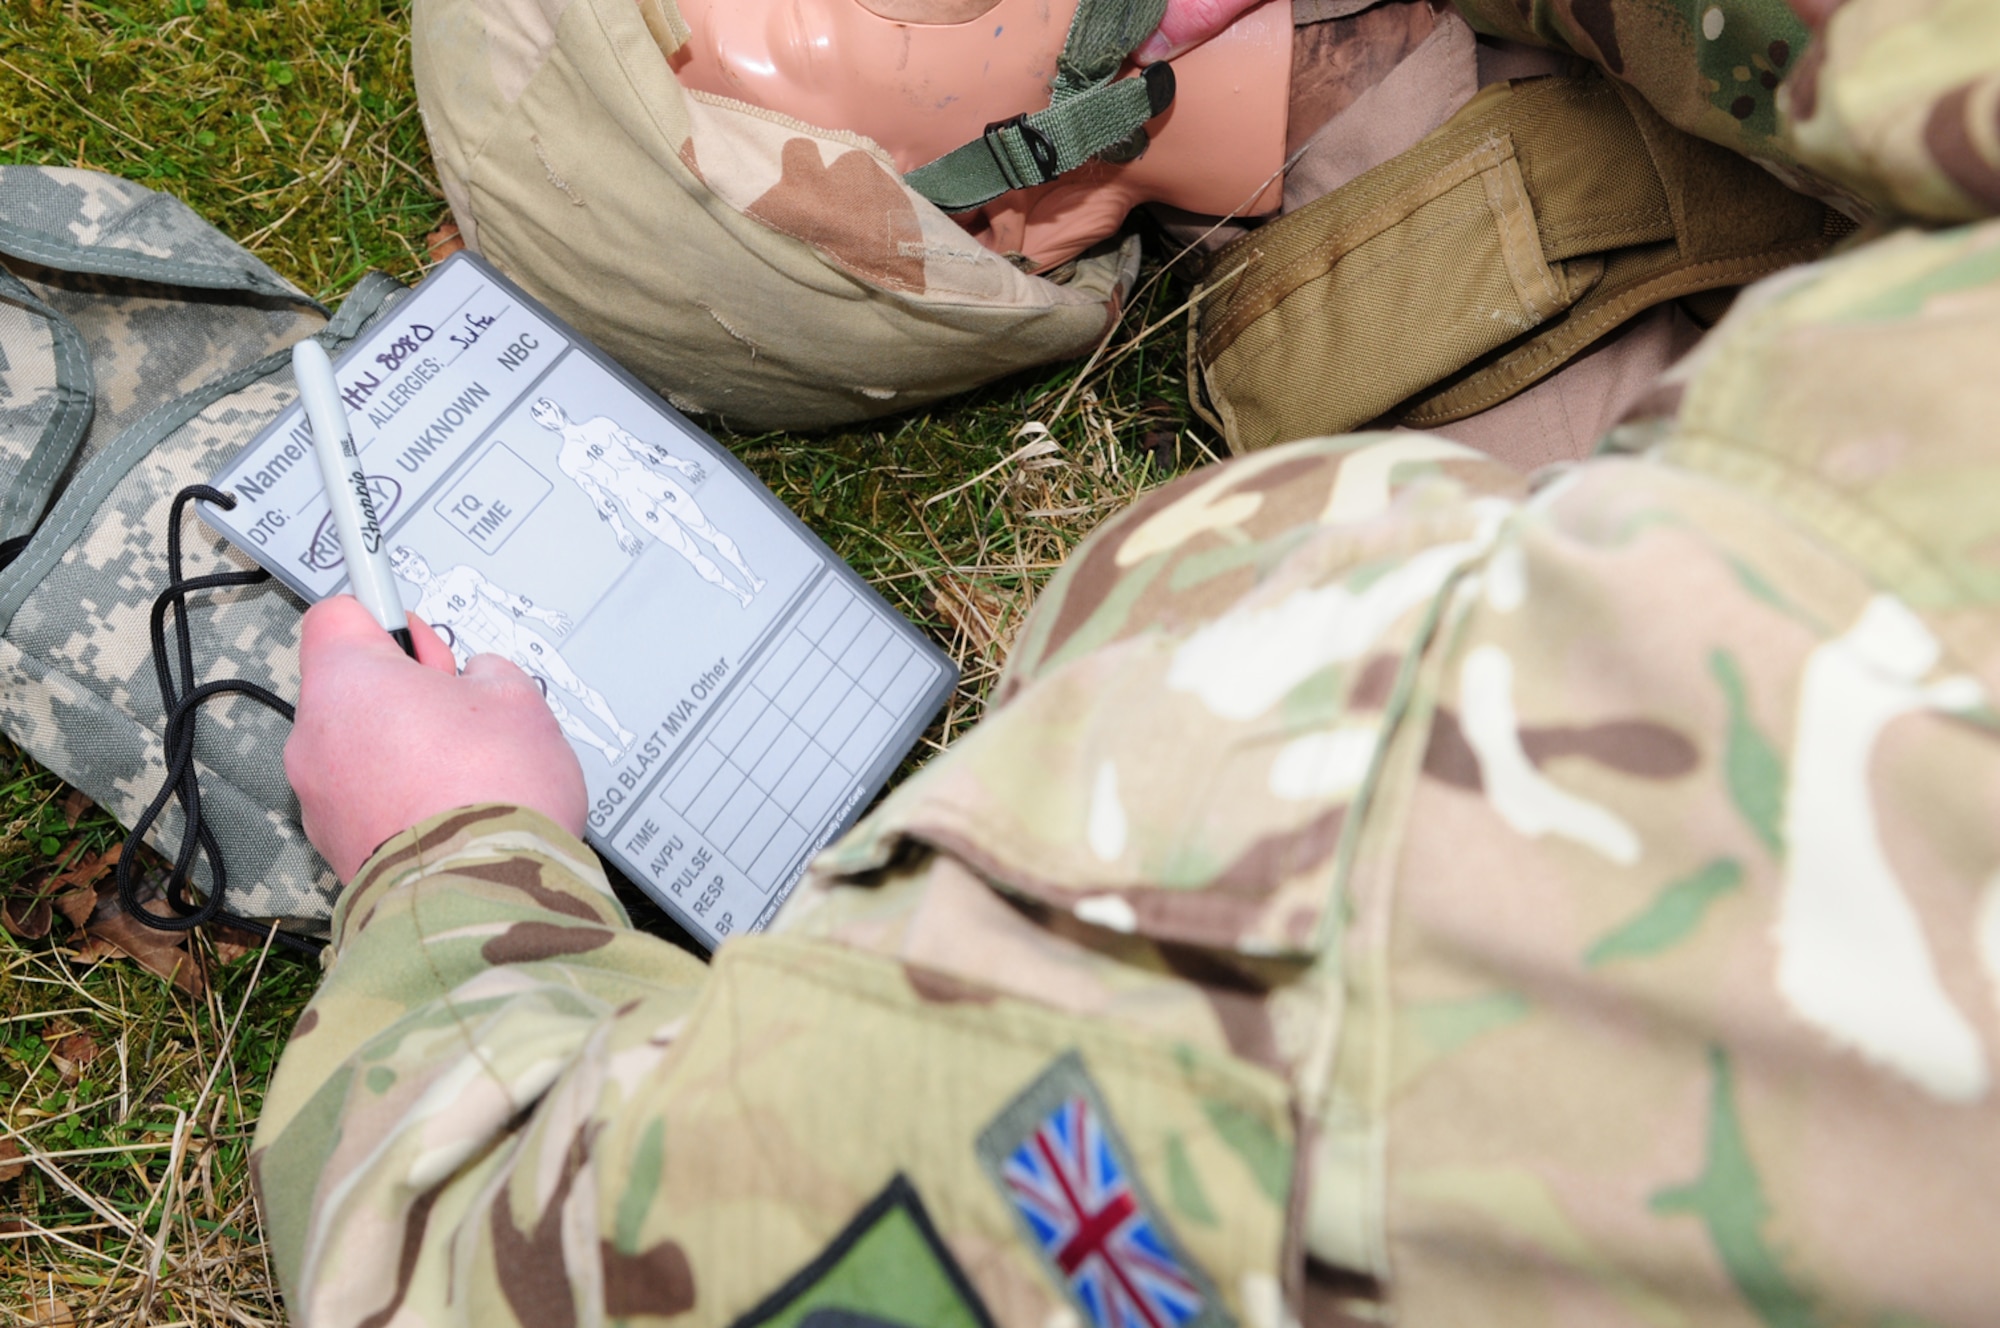 A British Army soldier from 19 Regiment Royal Artillery from Tidworth, Wiltshire, completes a casualty’s MIST card March 6, 2013, listing mechanism, injury sustained, symptoms and treatment given at Stanford Training Area, near Thetford, England. The card is then attached to the casualty as he or she is put on a casualty evacuation vehicle, providing vital information for medics, allowing them to keep track of injuries, treatments and any medication given to patients. Members of the 352nd Special Operations Support Squadron Medical Element provided training to personnel from 19 Regiment and 3 Battalion The Rifles, from Edinburgh, Scotland. (U.S. Air Force photo by Karen Abeyasekere/Released)